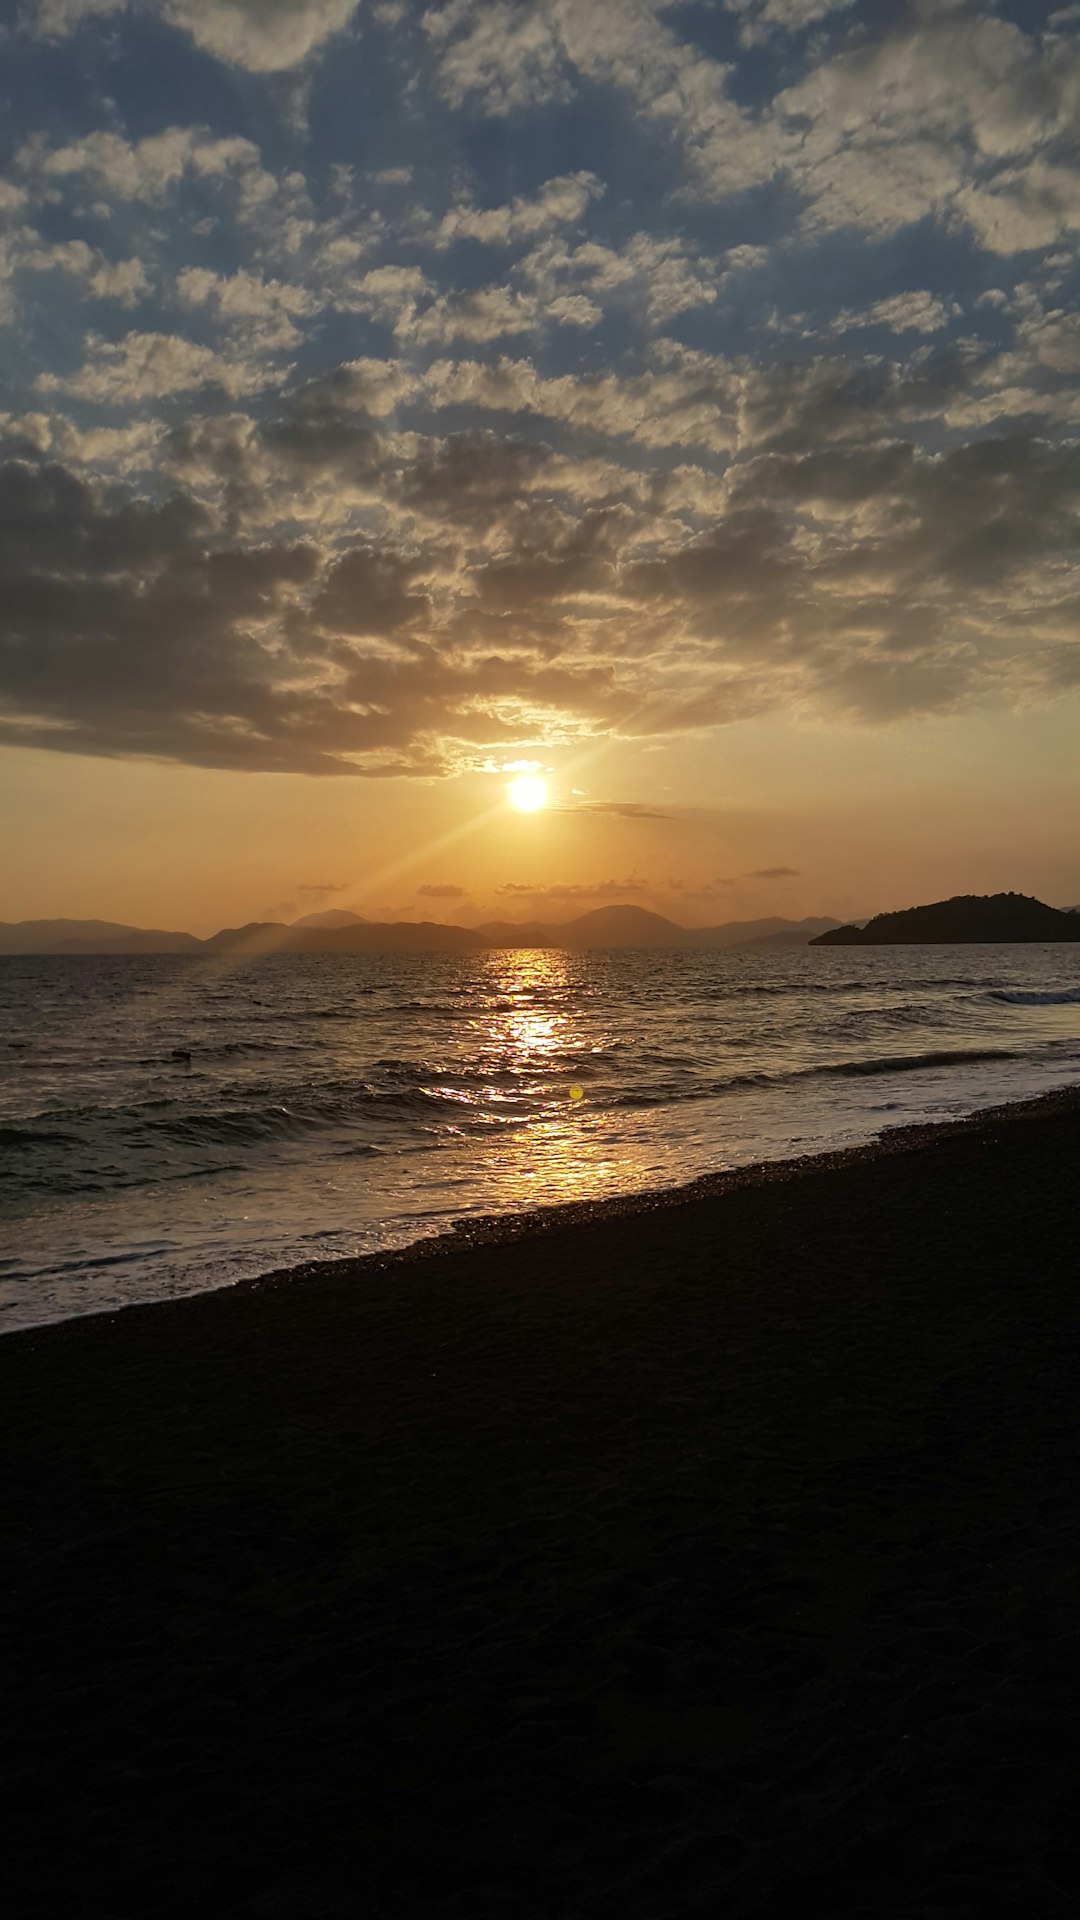 travelers stories about Beach in Fethiye, Turkey